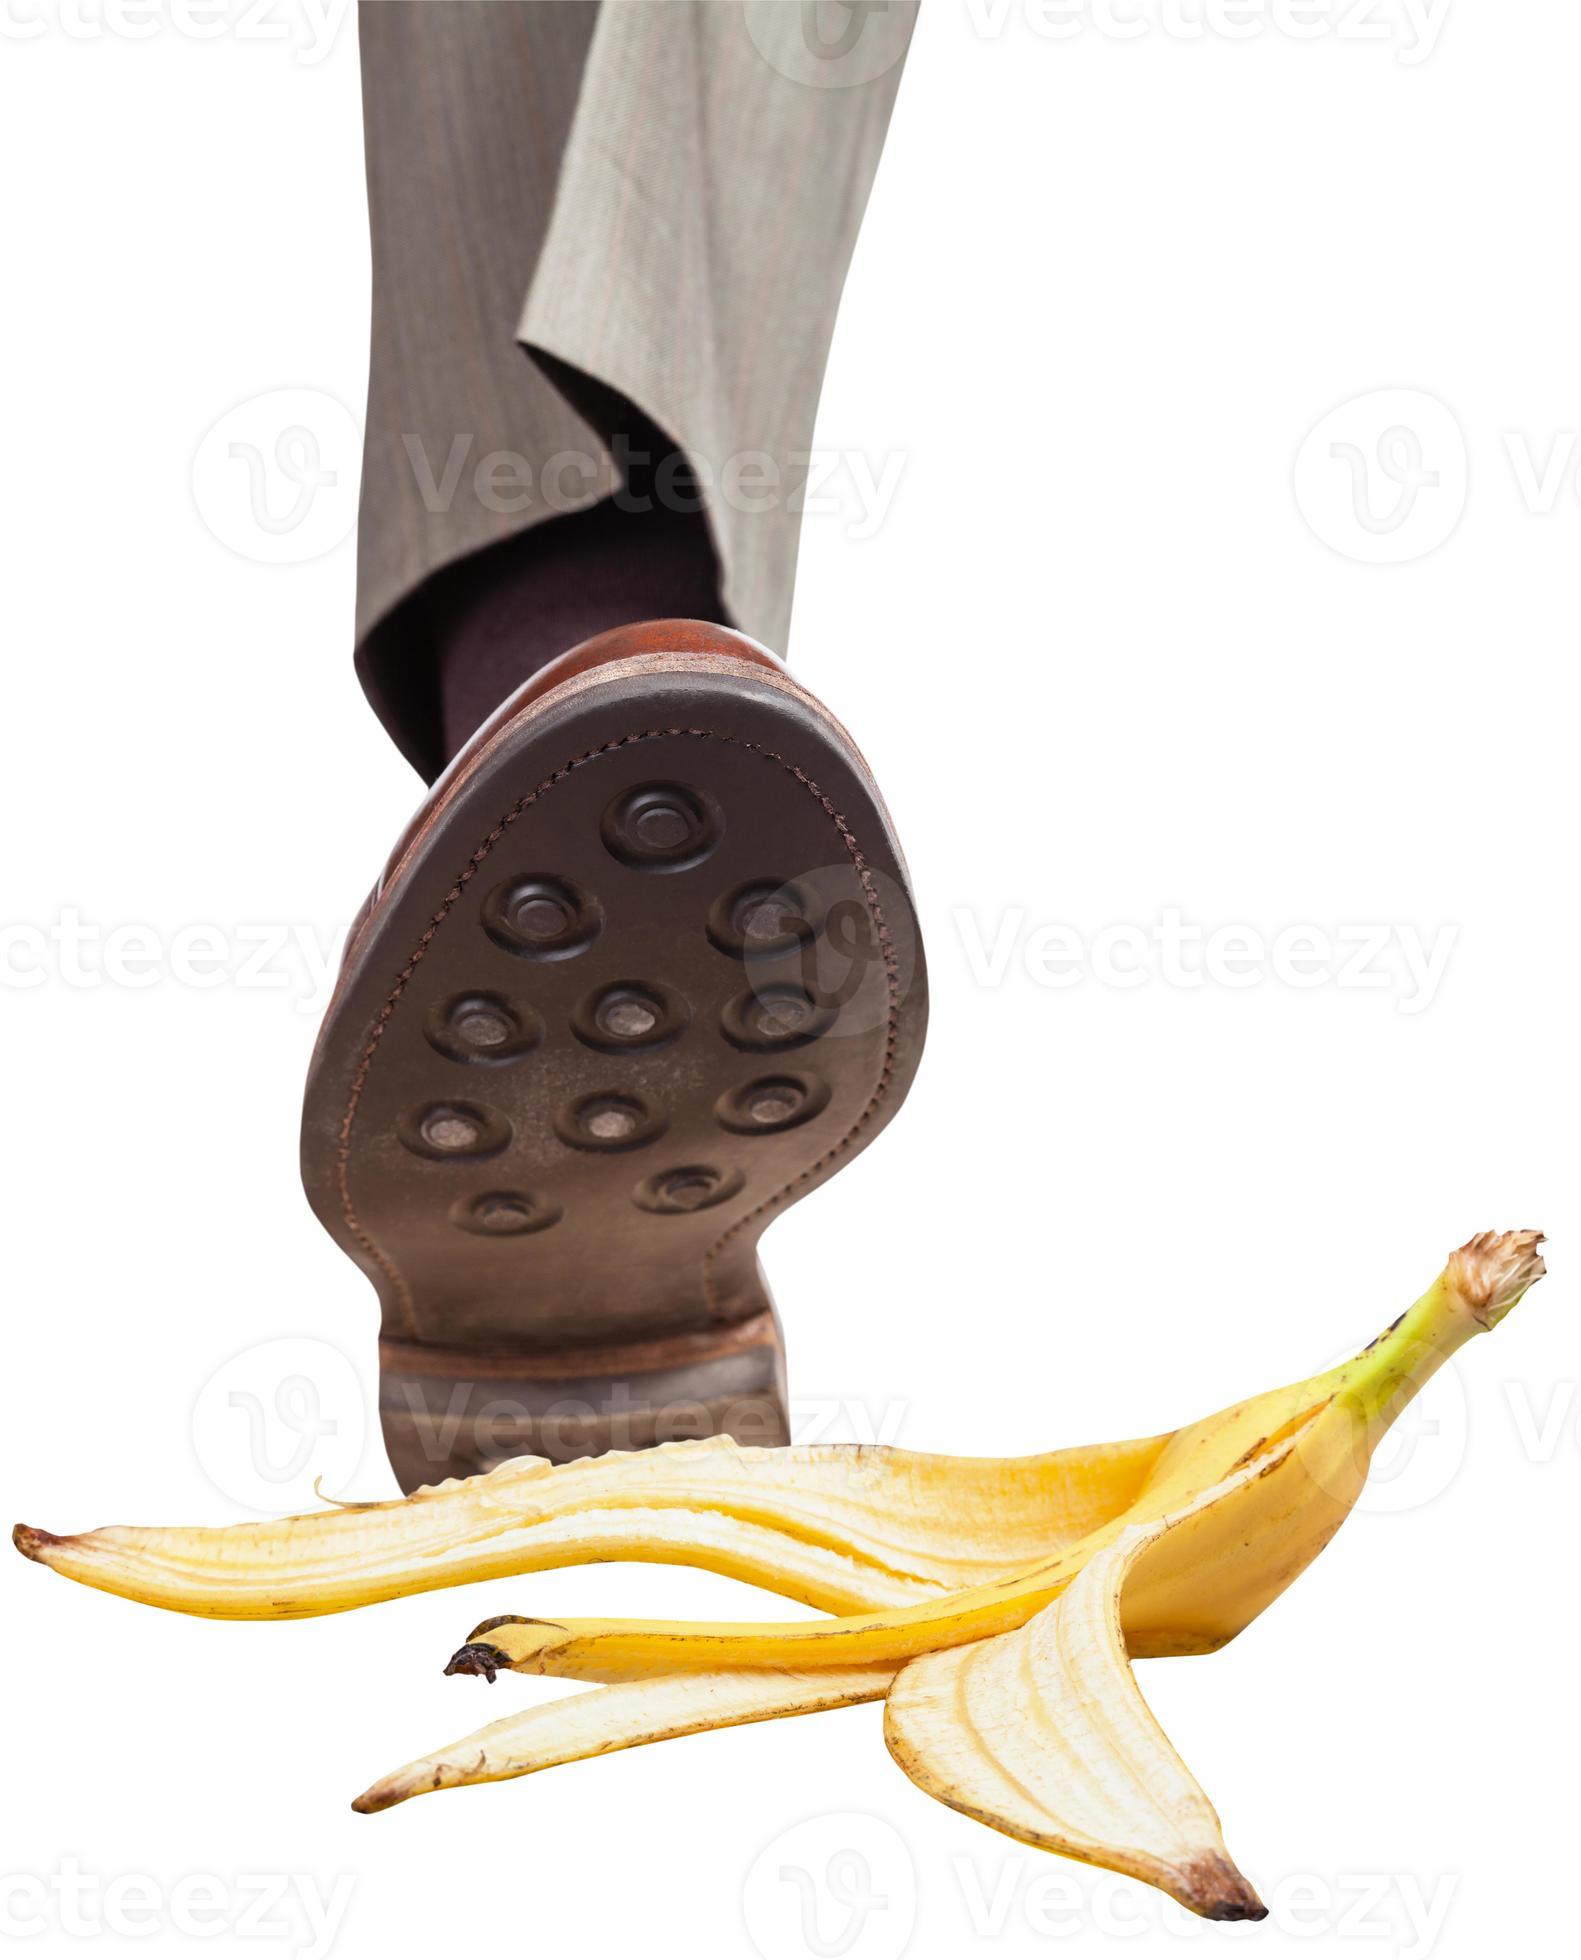 leg in right brown shoe stepping on banana peel 11450215 Stock Photo at ...